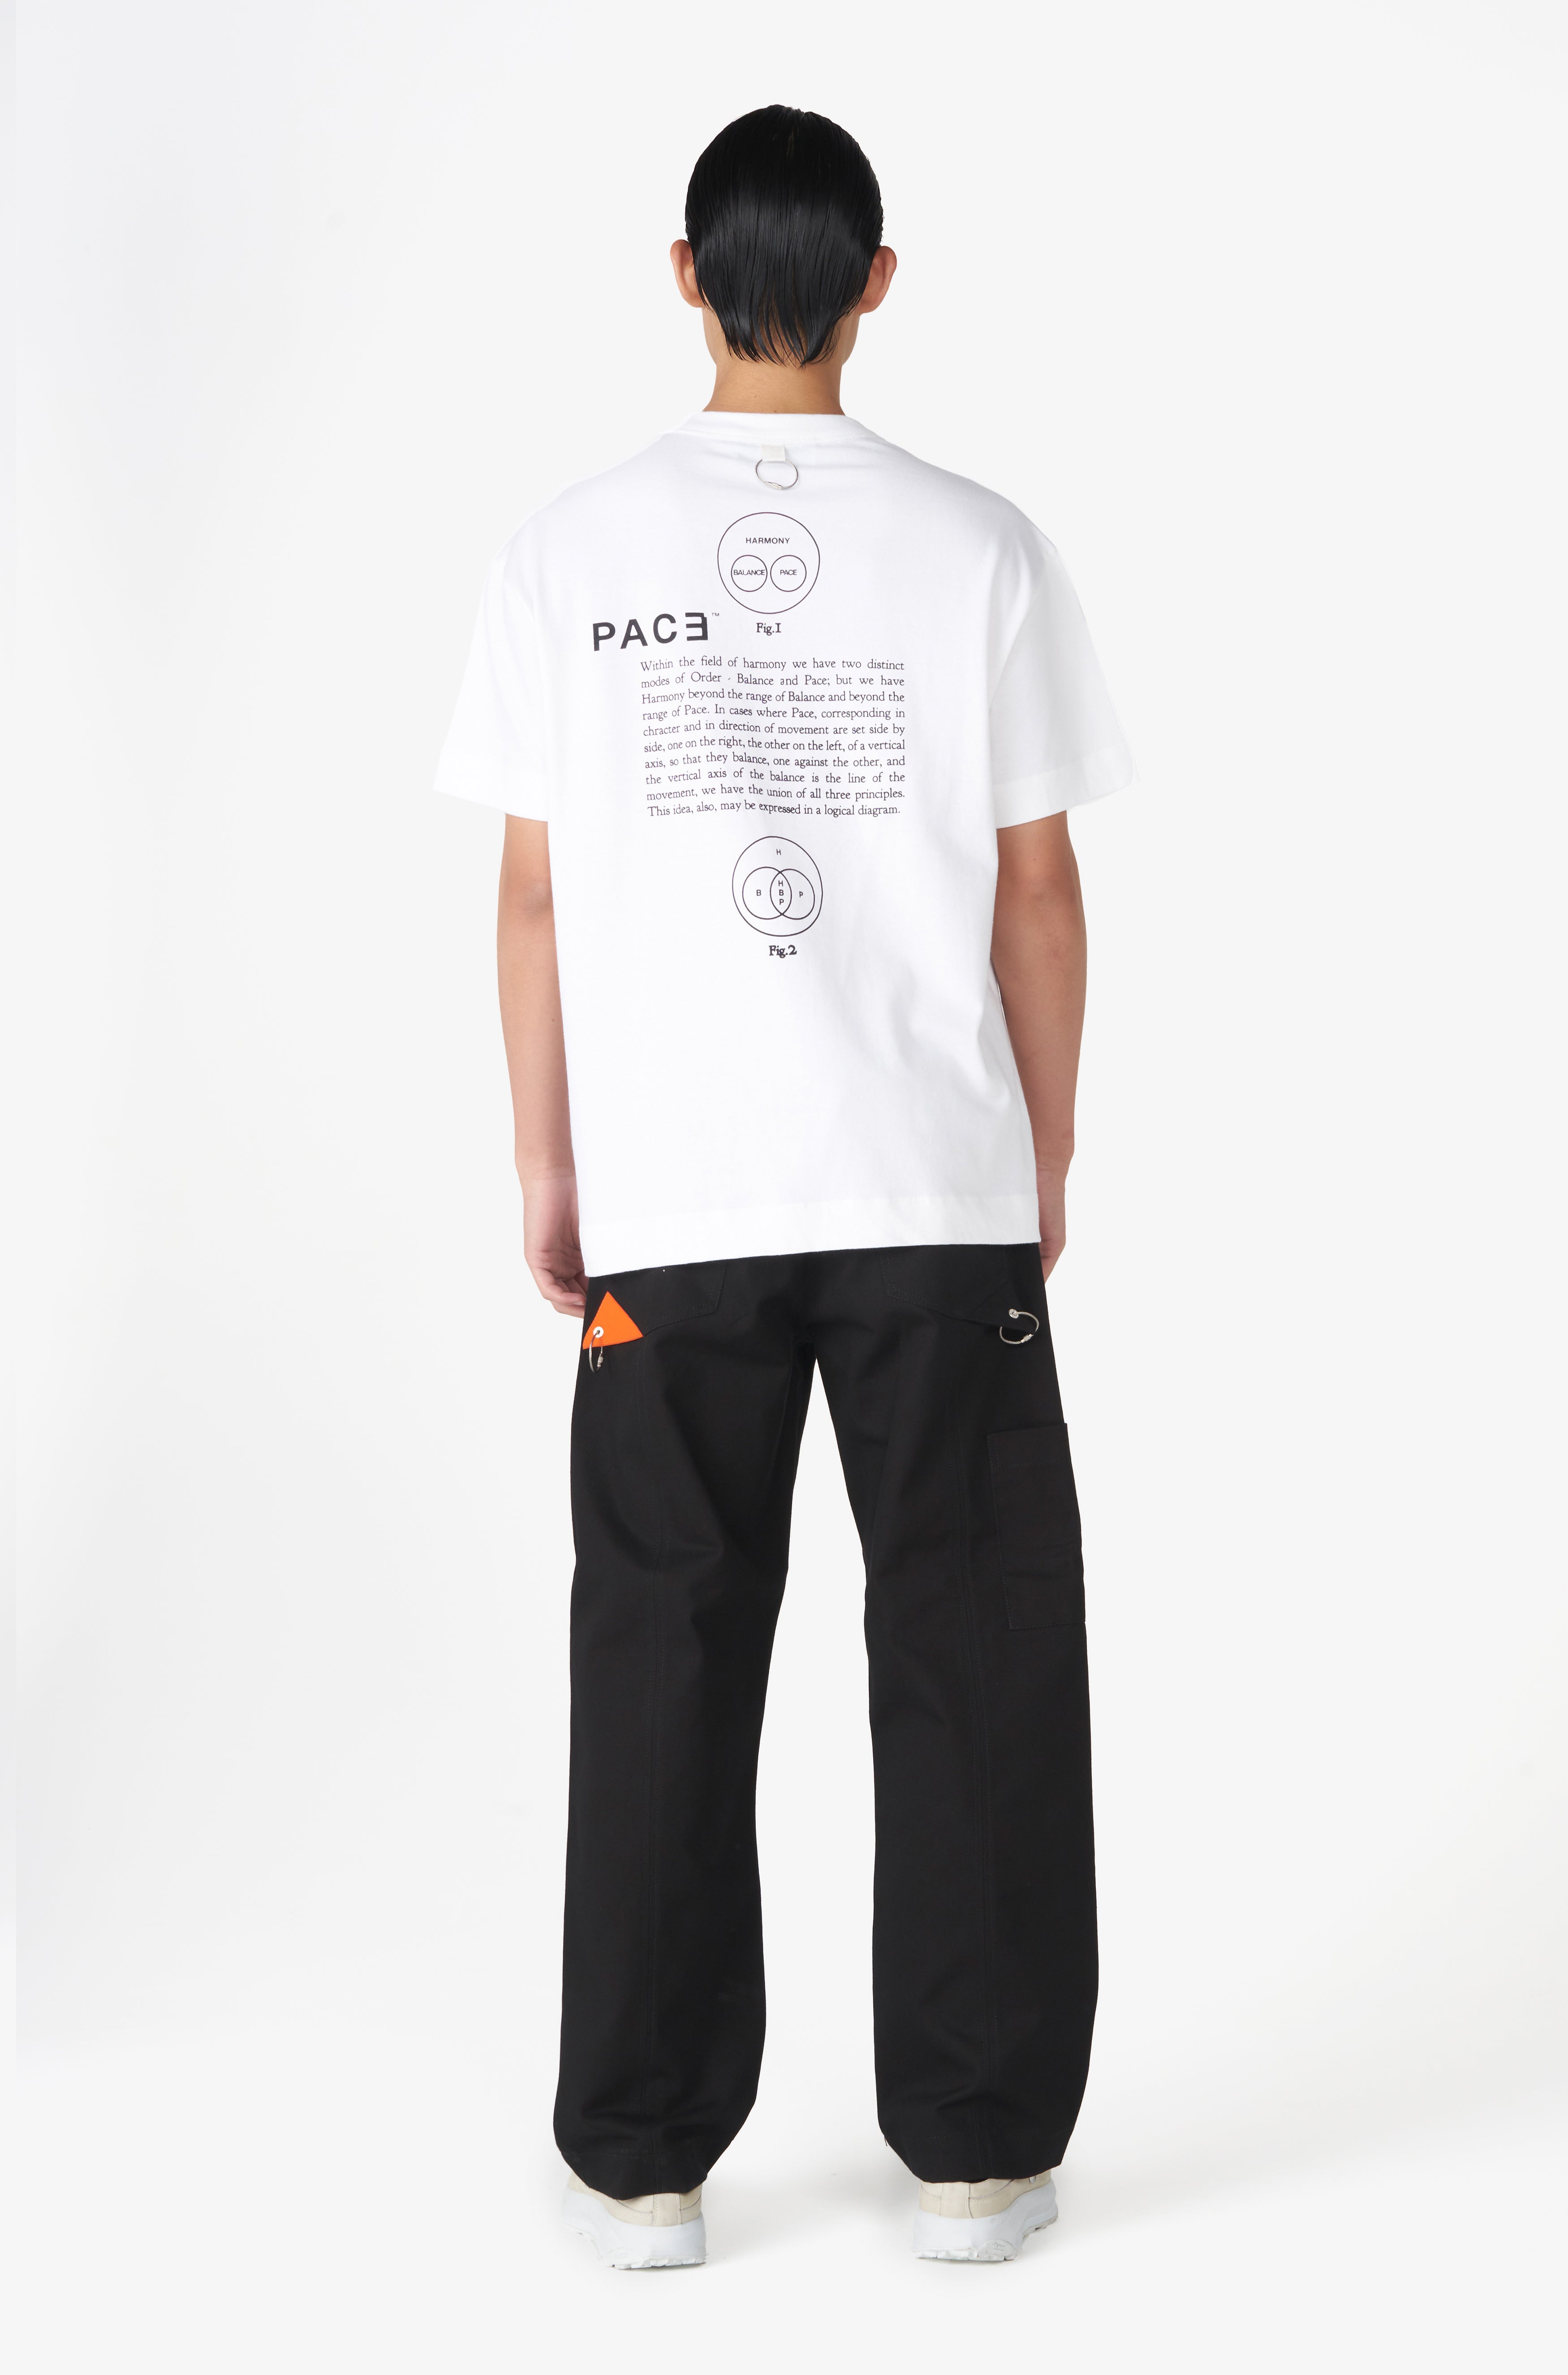 HARMONY BALANCE AND PACE TEE OFF WHITE